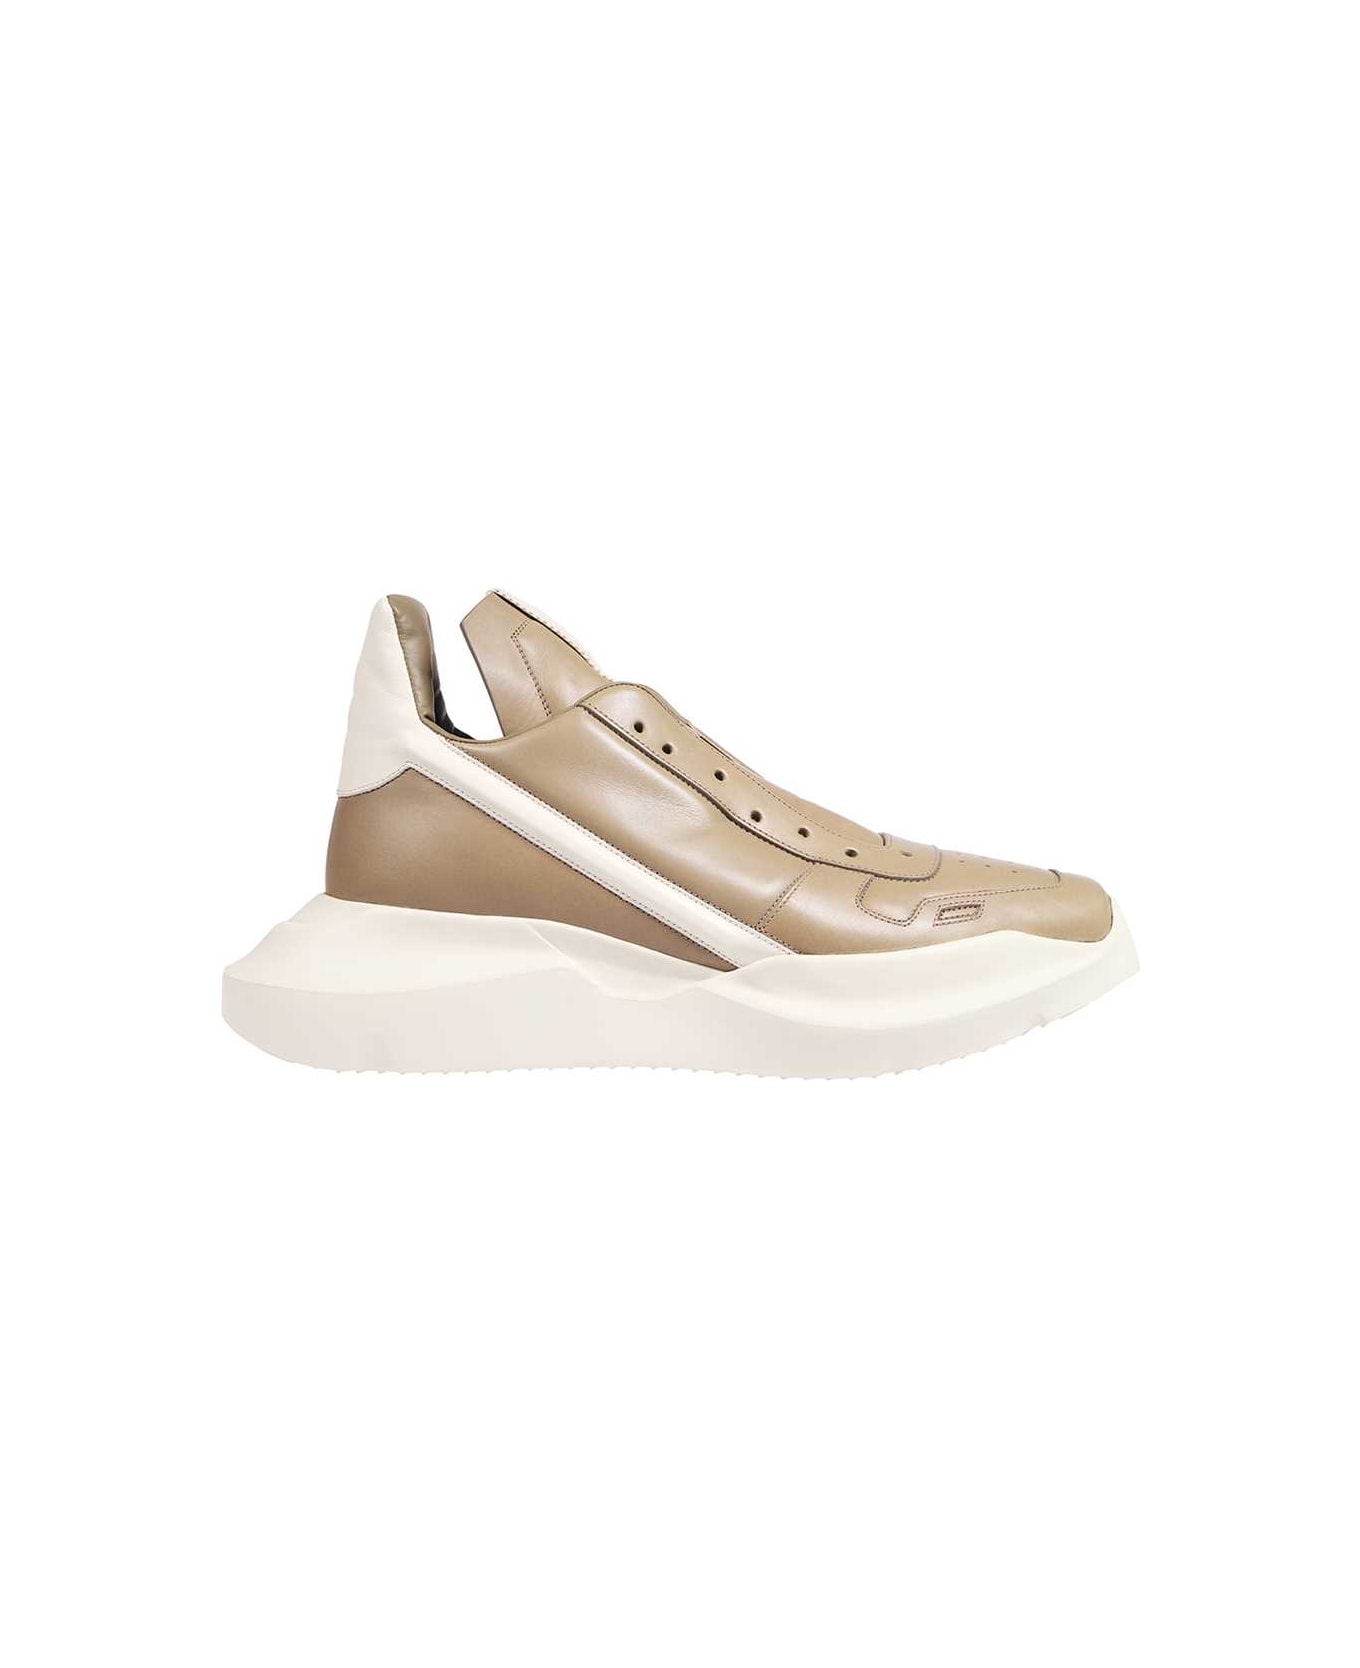 Rick Owens Leather Sneakers - White